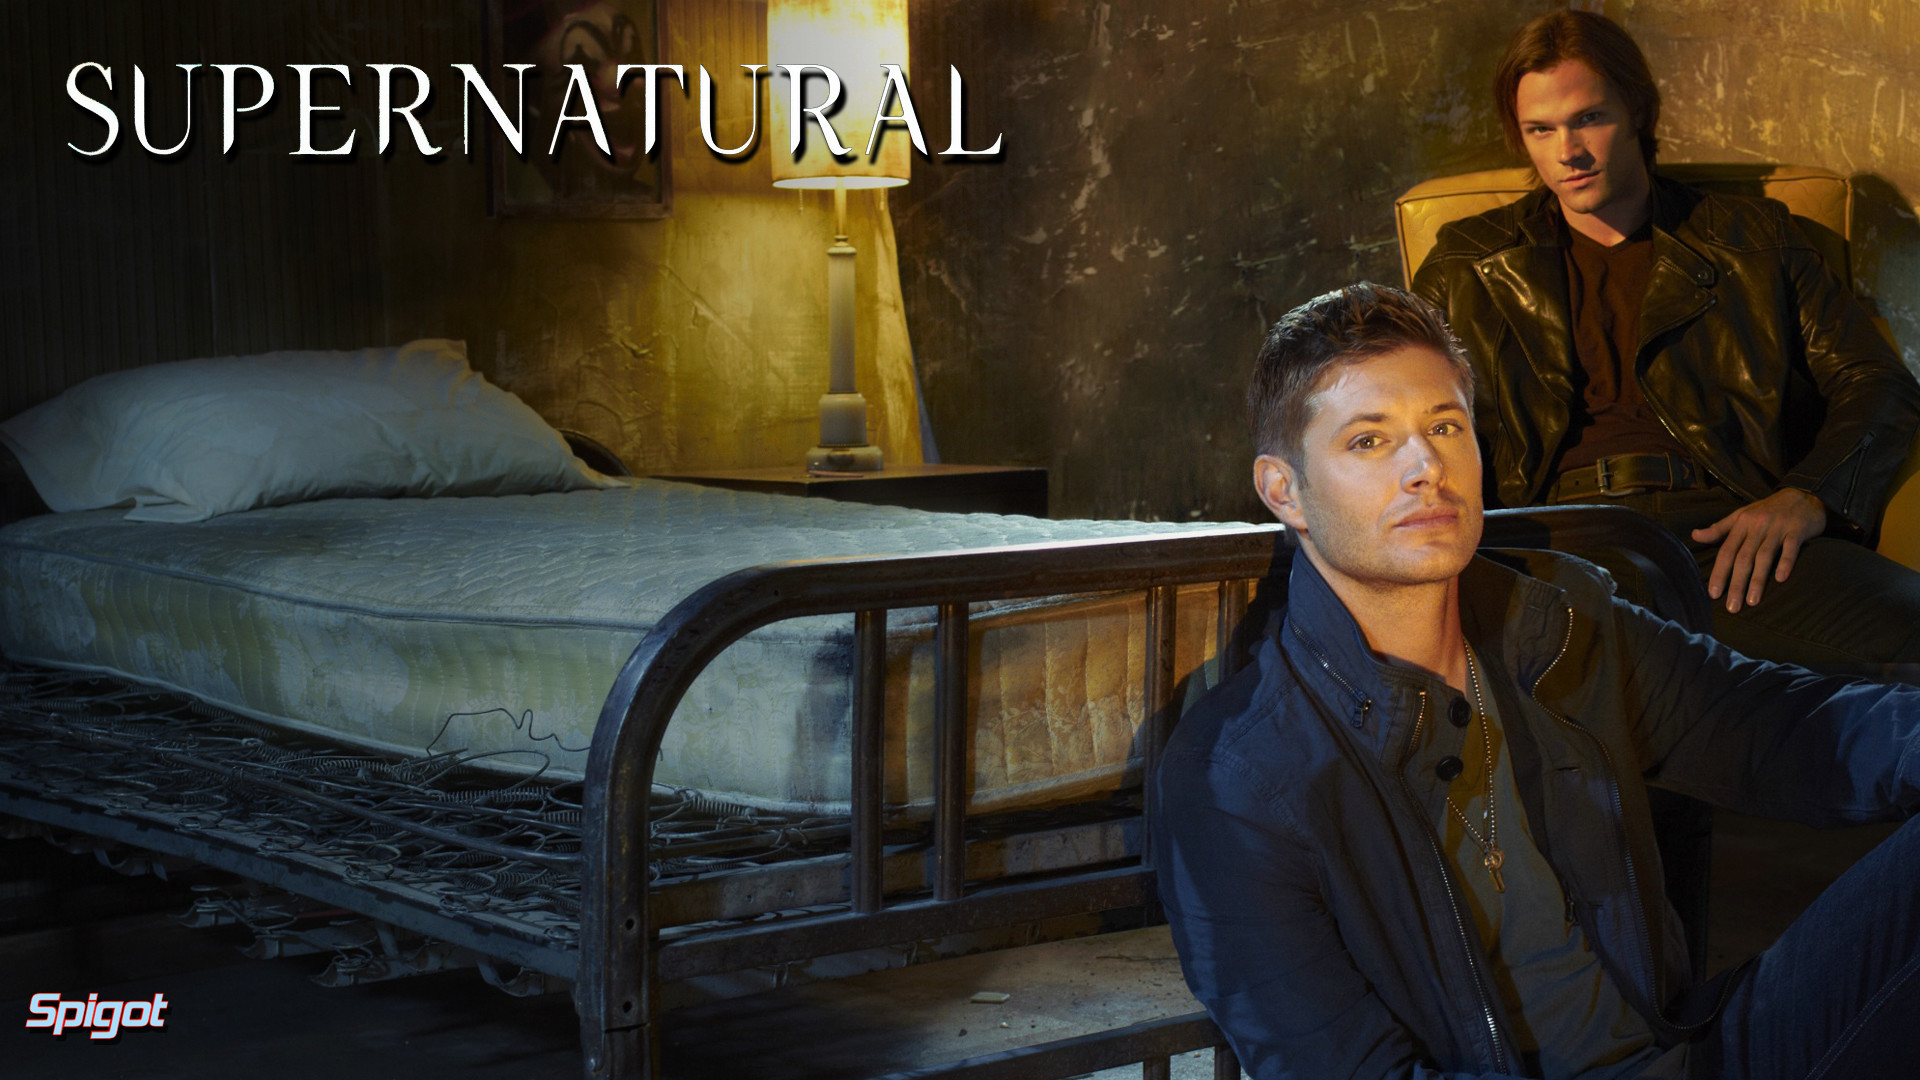 1920x1080 Here's a new wallpaper I did for the fantastic show Supernatural staring  Jared Padalecki (Sam Winchester) & Jensen Ackles (Dean Winchester), this  show just ...